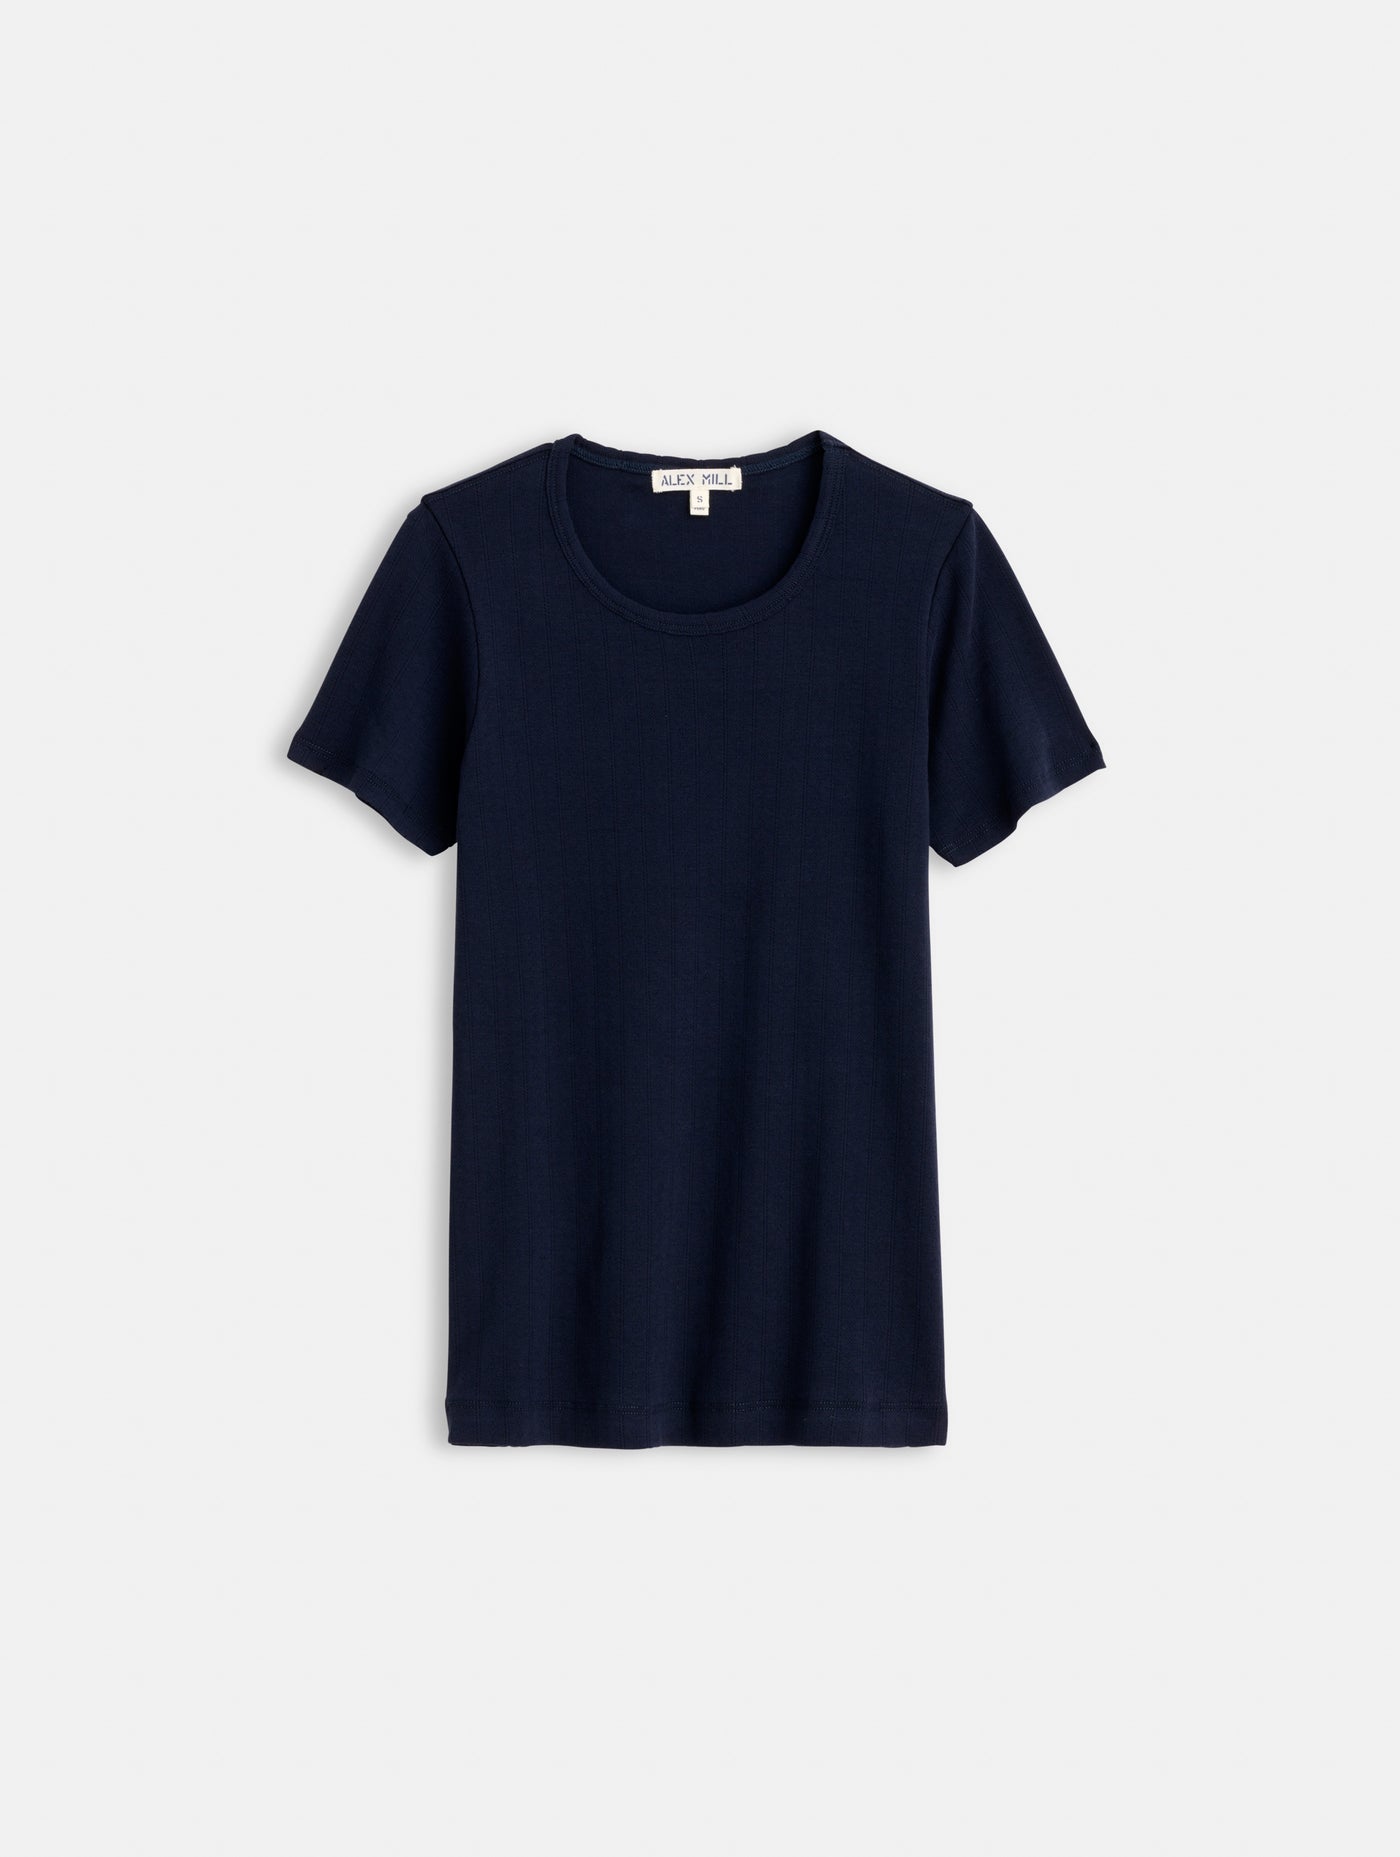 Remy Pointelle Tee